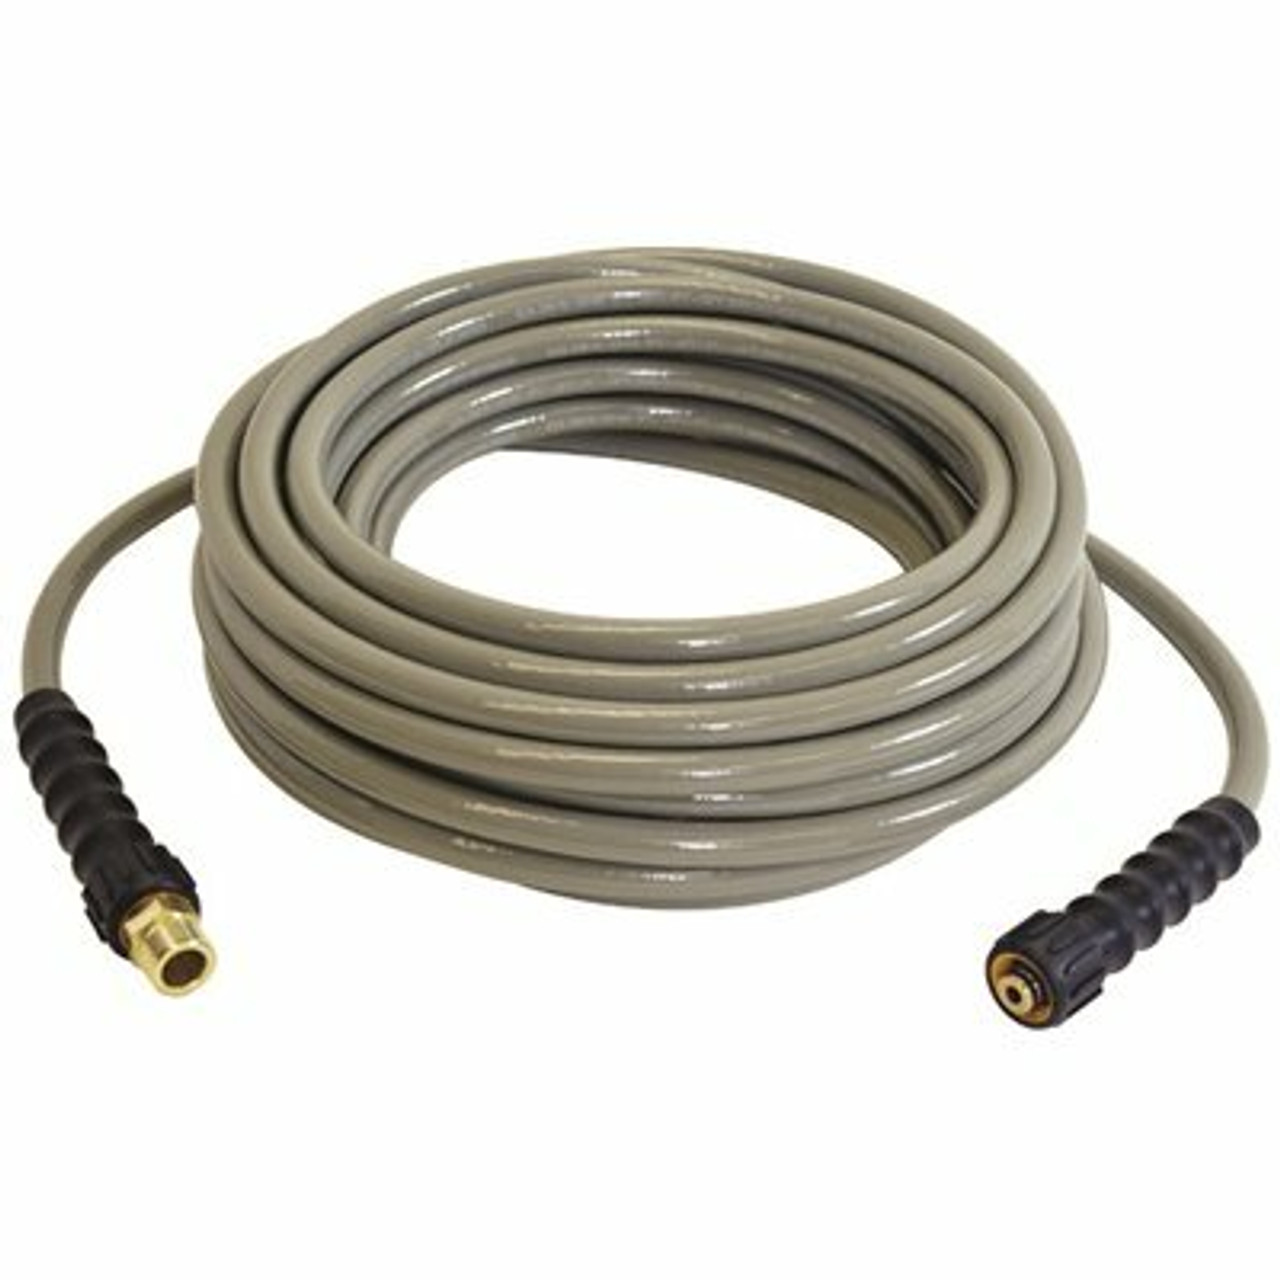 Simpson Morflex 5/16 In. X 50 Ft. Hose Attachment For 3700 Psi Pressure Washers